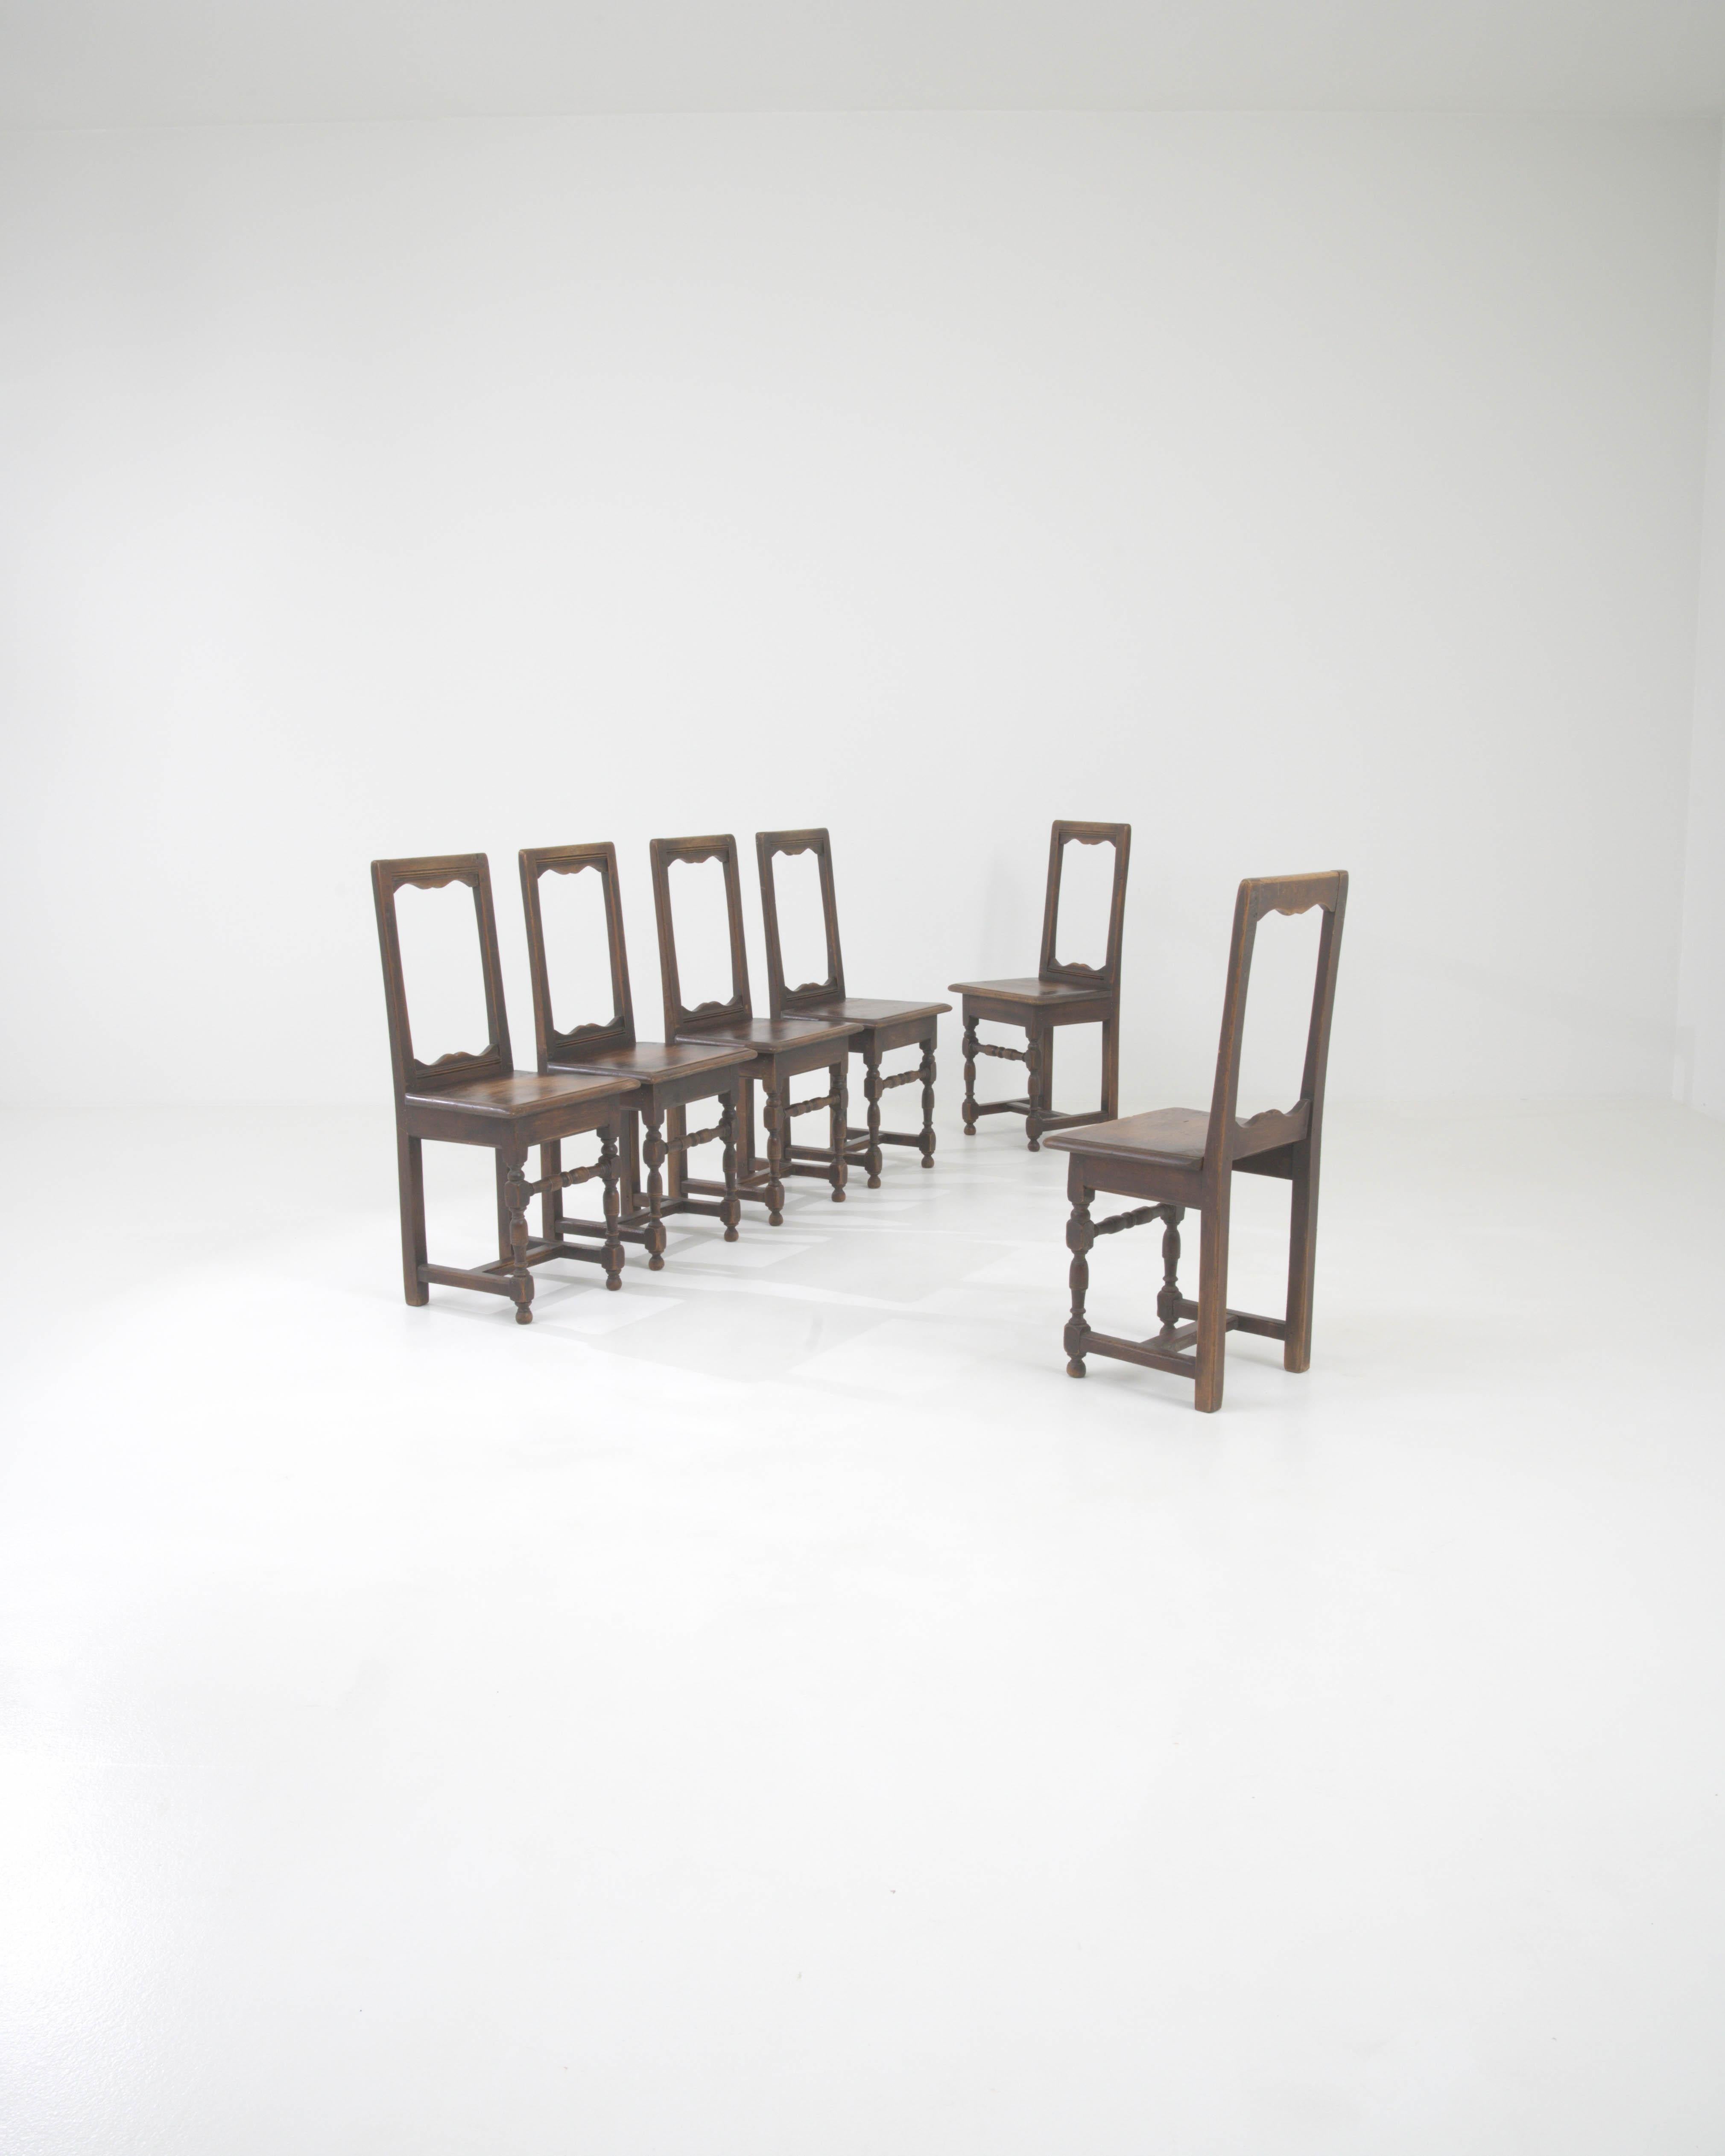 Step back in time with this magnificent set of six 1900s Belgian wooden dining chairs, a testament to the enduring elegance of early 20th-century design. Each chair boasts a strong, dark wooden frame with a rich patina that tells its own unique